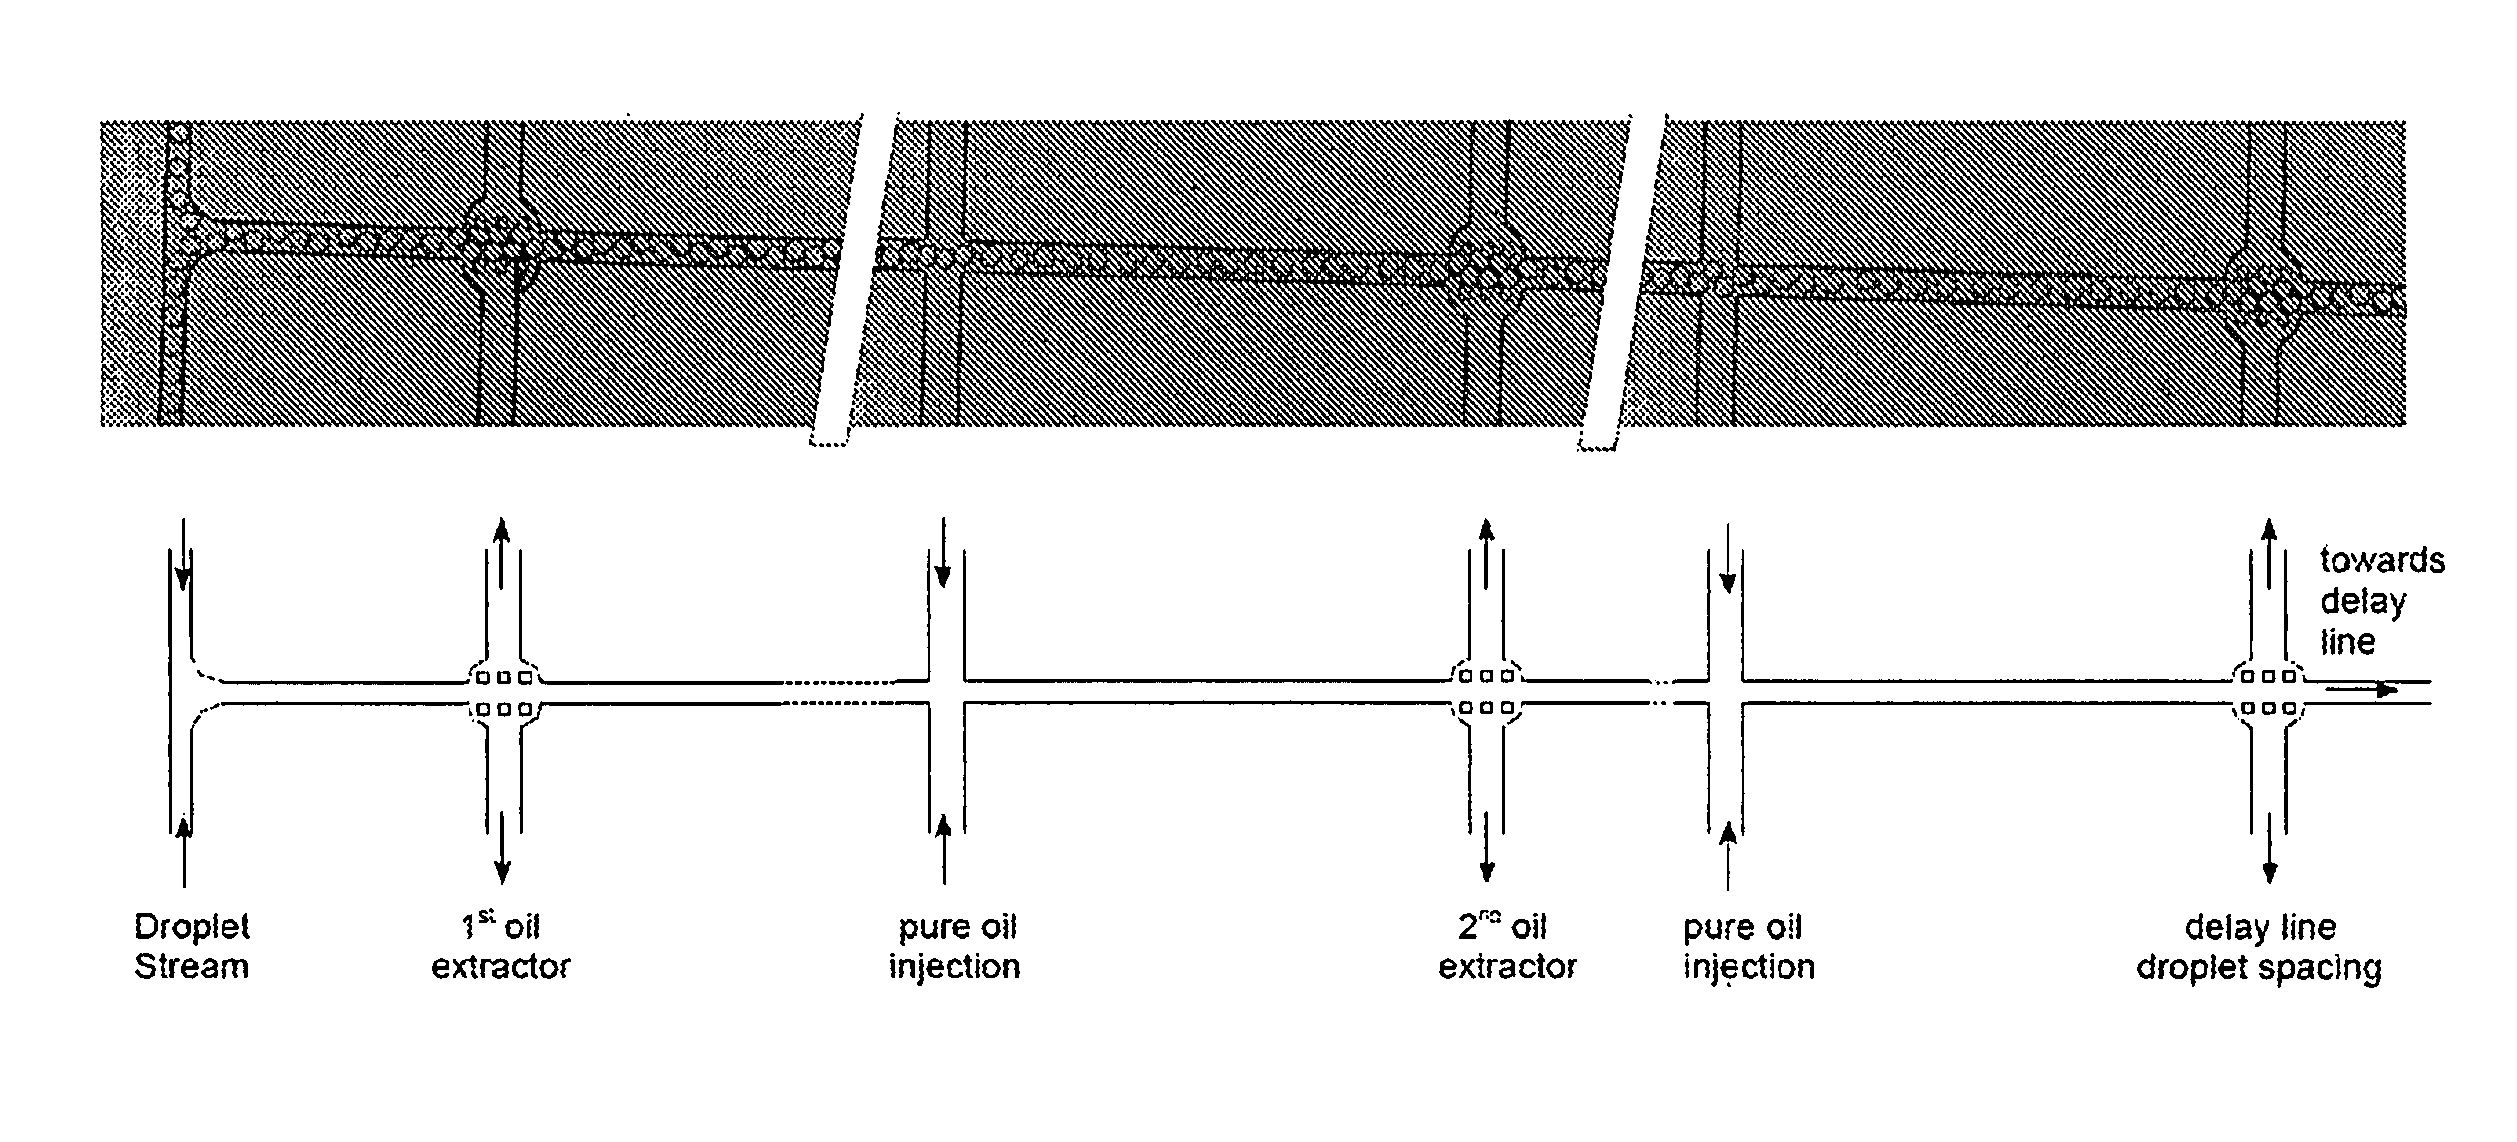 Microfluidic systems and methods for reducing the exchange of molecules between droplets